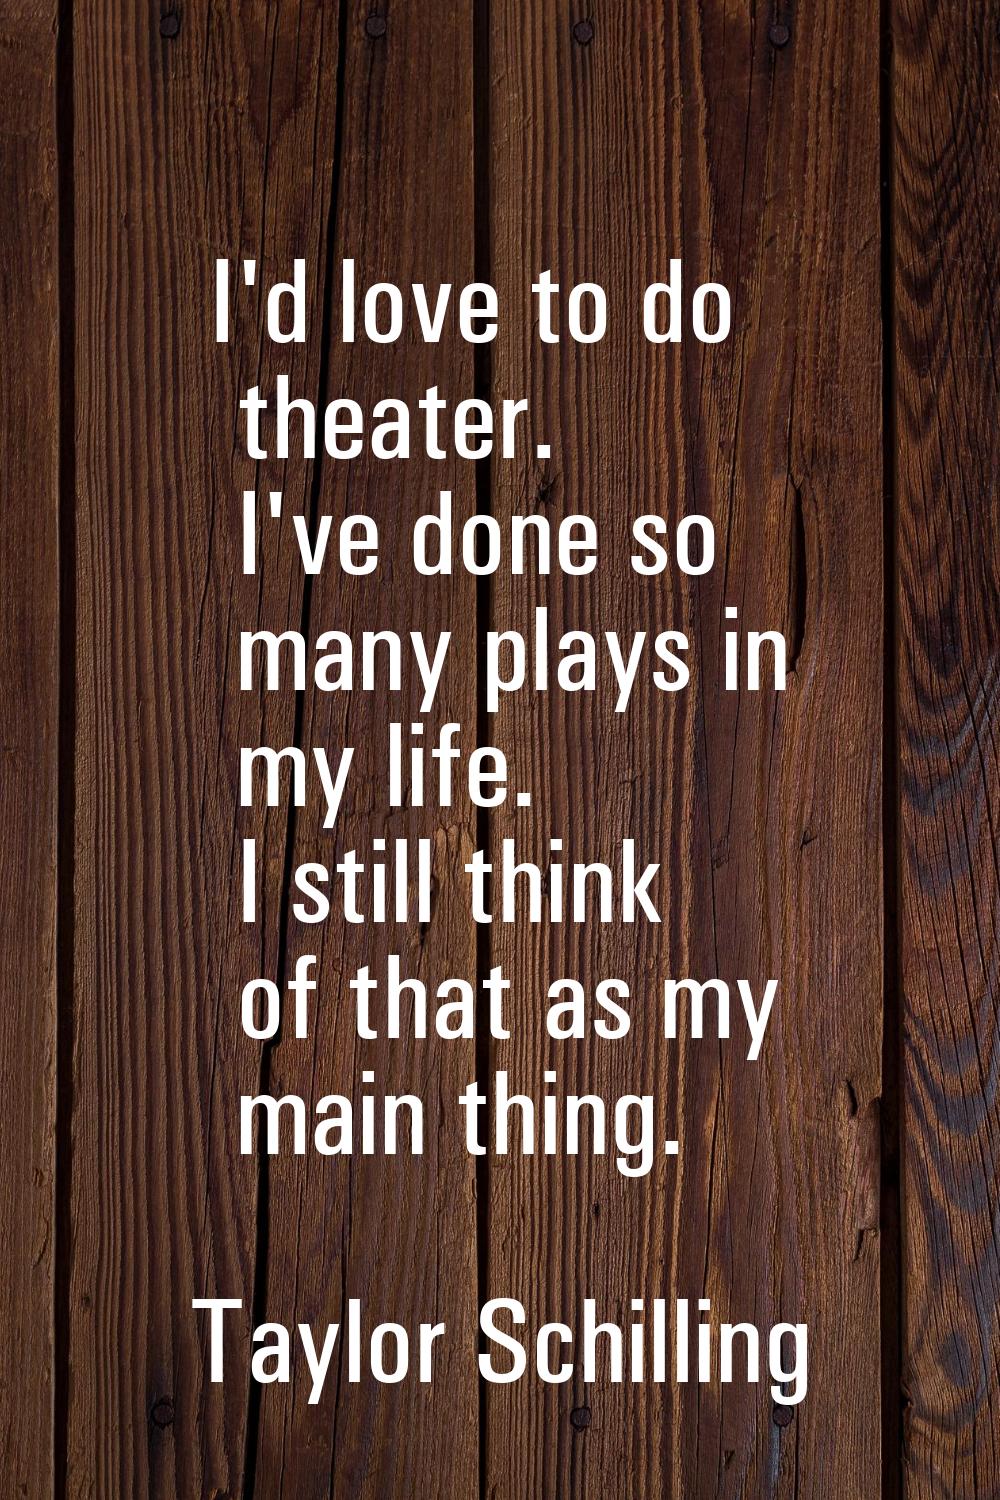 I'd love to do theater. I've done so many plays in my life. I still think of that as my main thing.